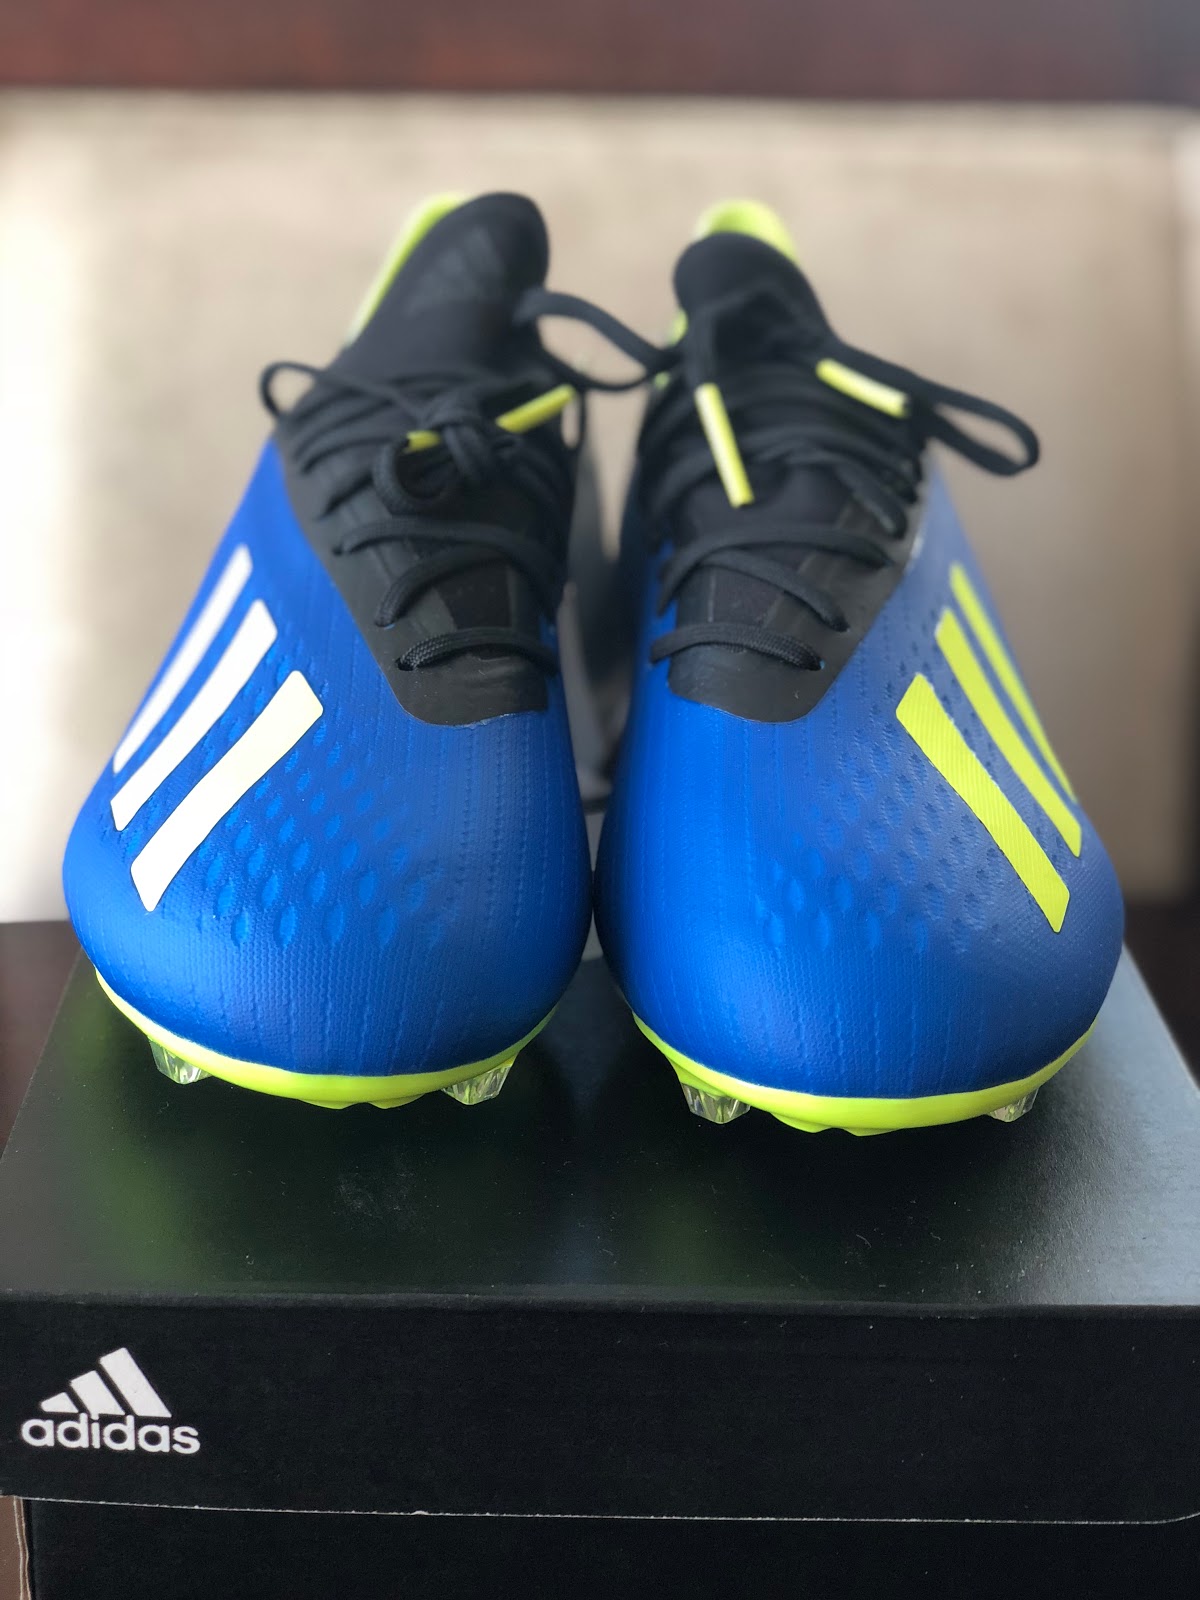 adidas x 18.2 review